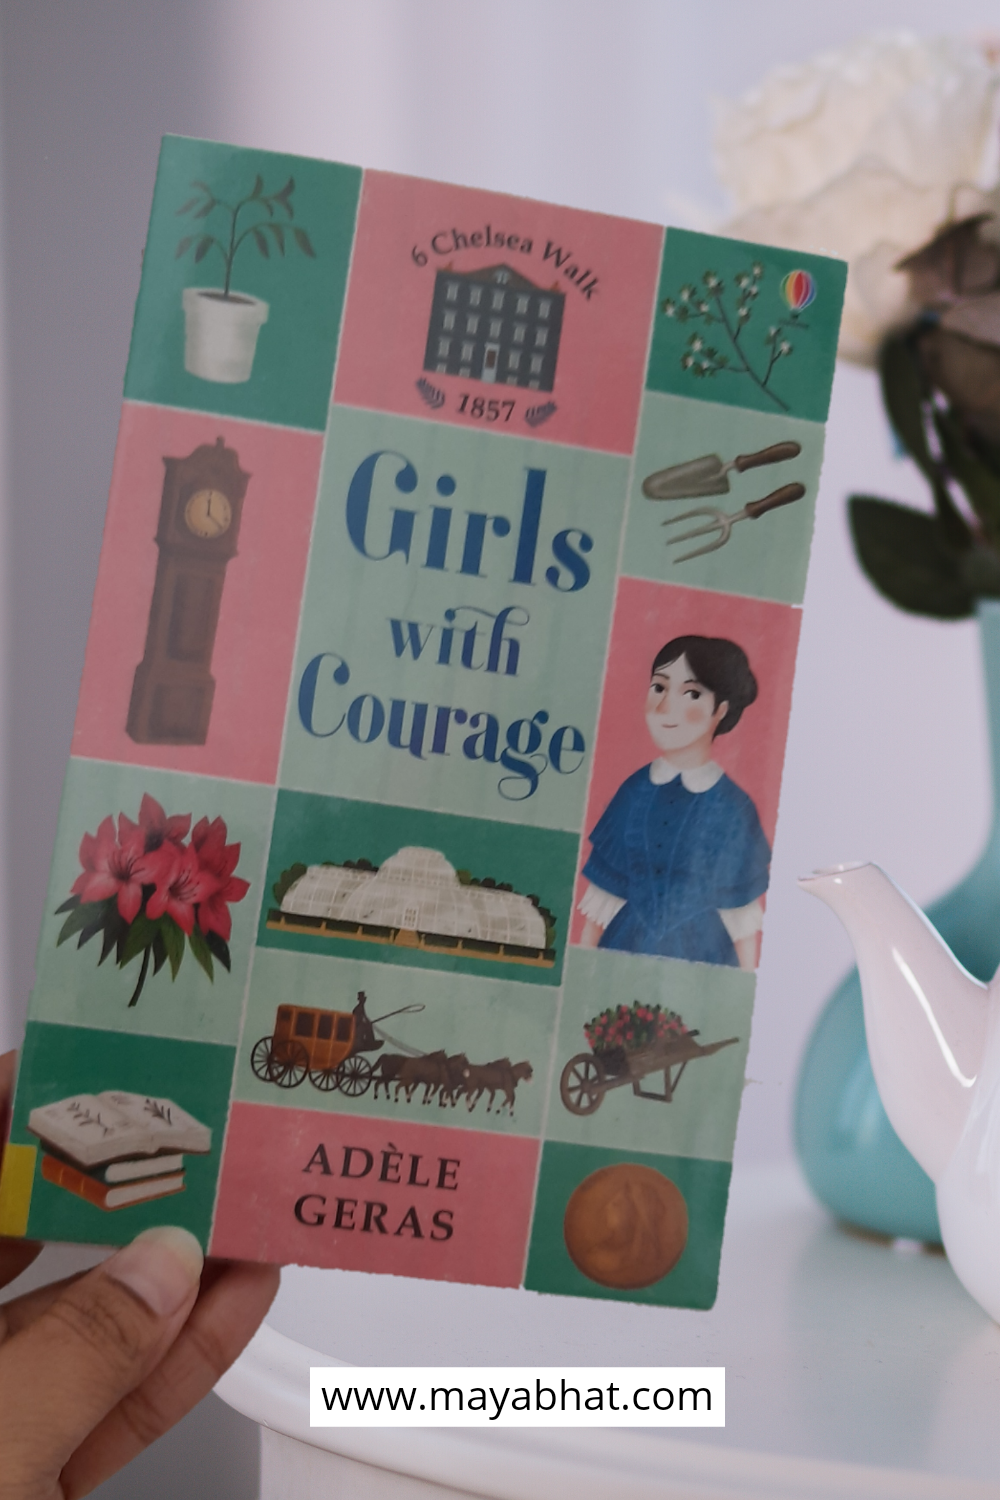 Girls with courage